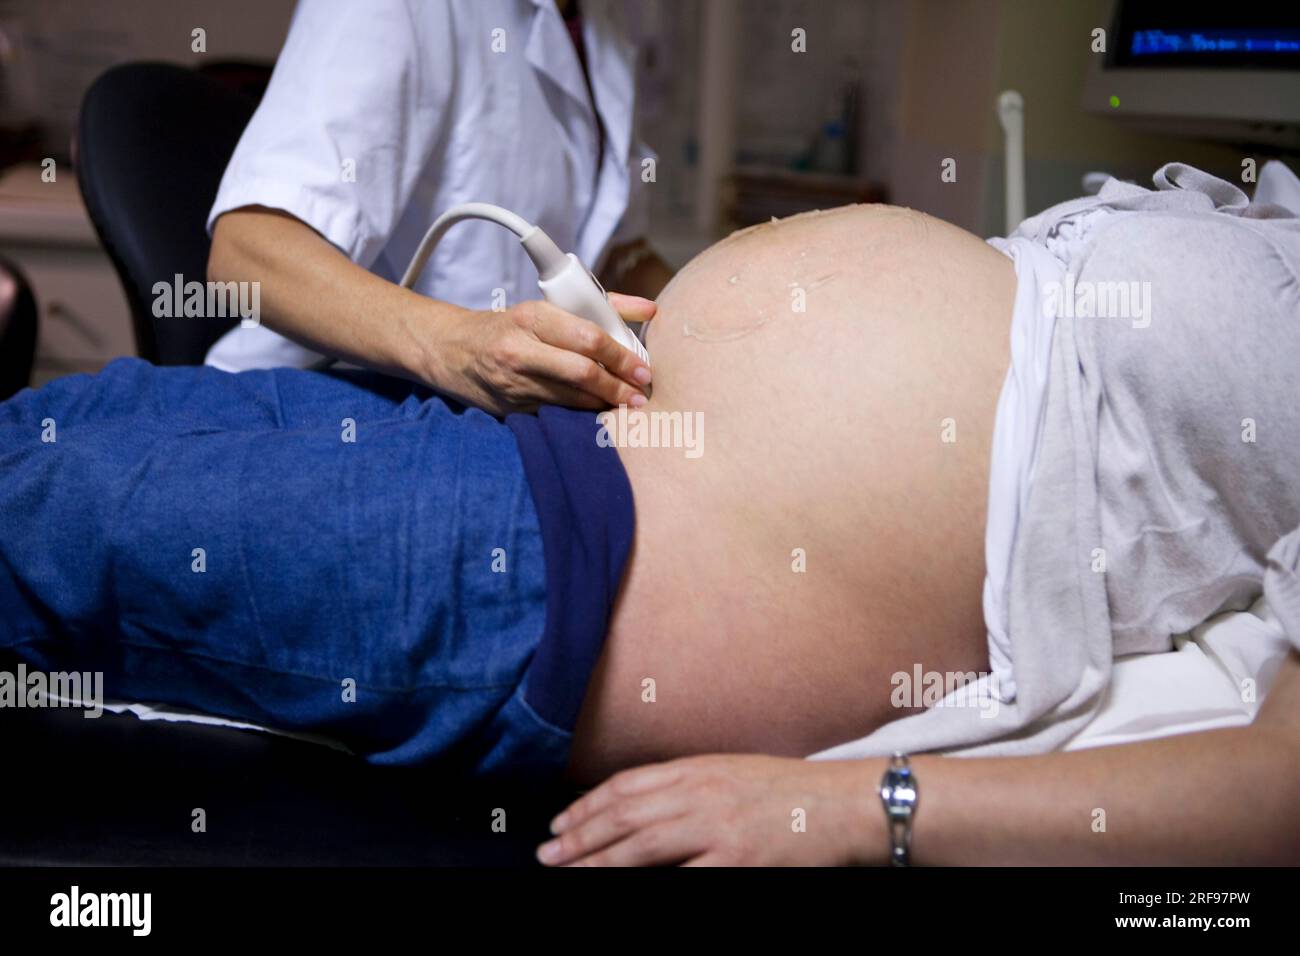 Ultrasound scan of a pregnant woman at 8 months of pregnancy in the maternity ward of a hospital. Stock Photo